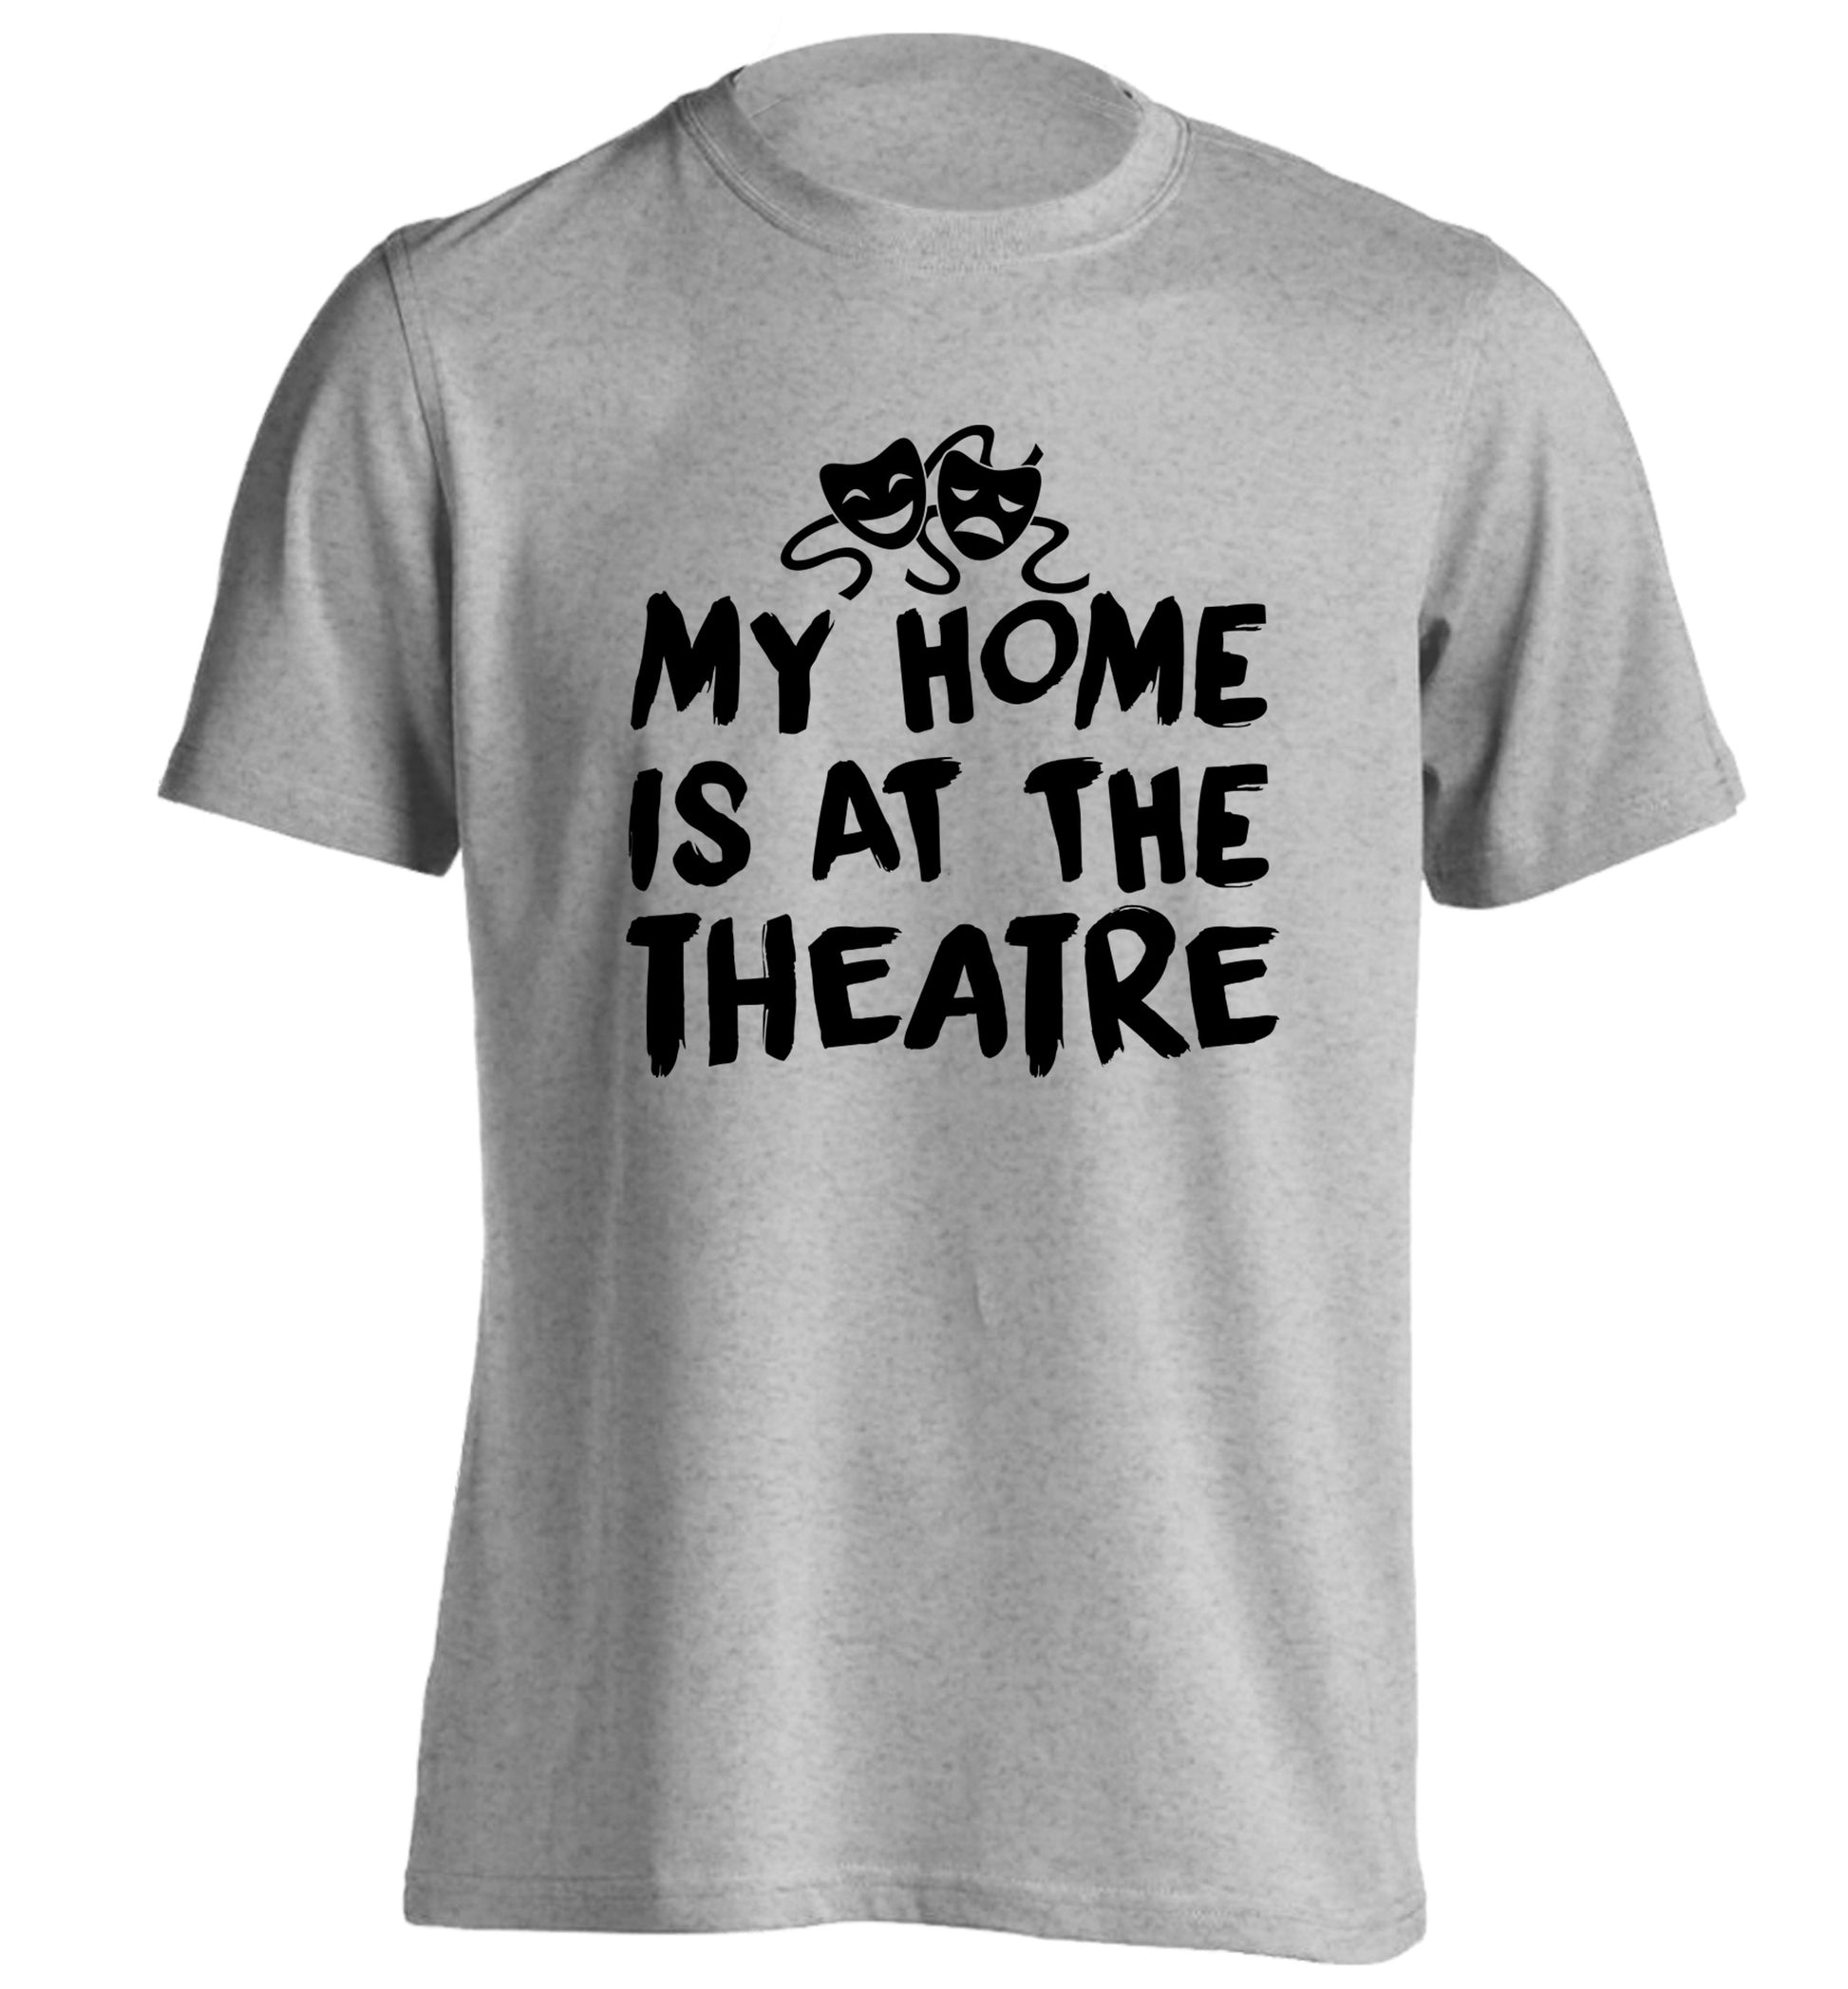 My home is at the theatre adults unisex grey Tshirt 2XL